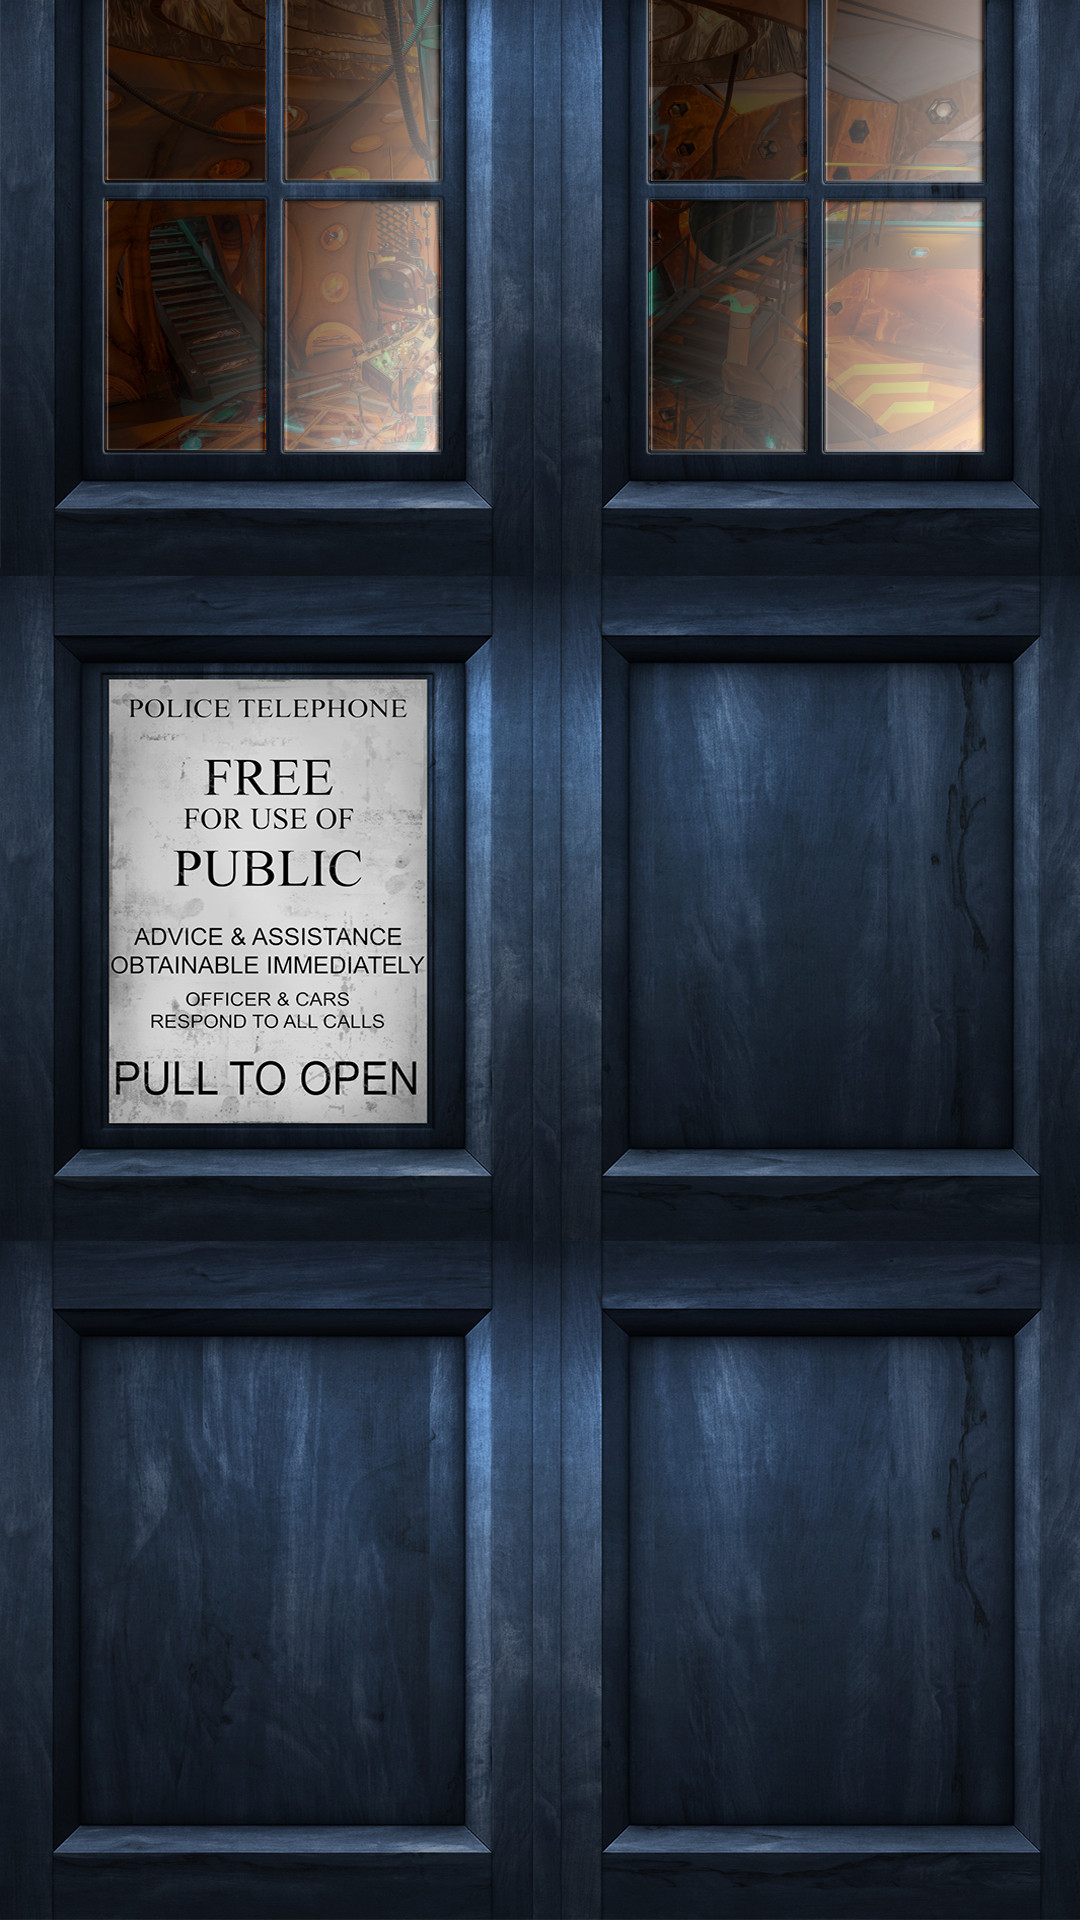 1080x1920 Made a Tardis HQ wallpaper for my phone.